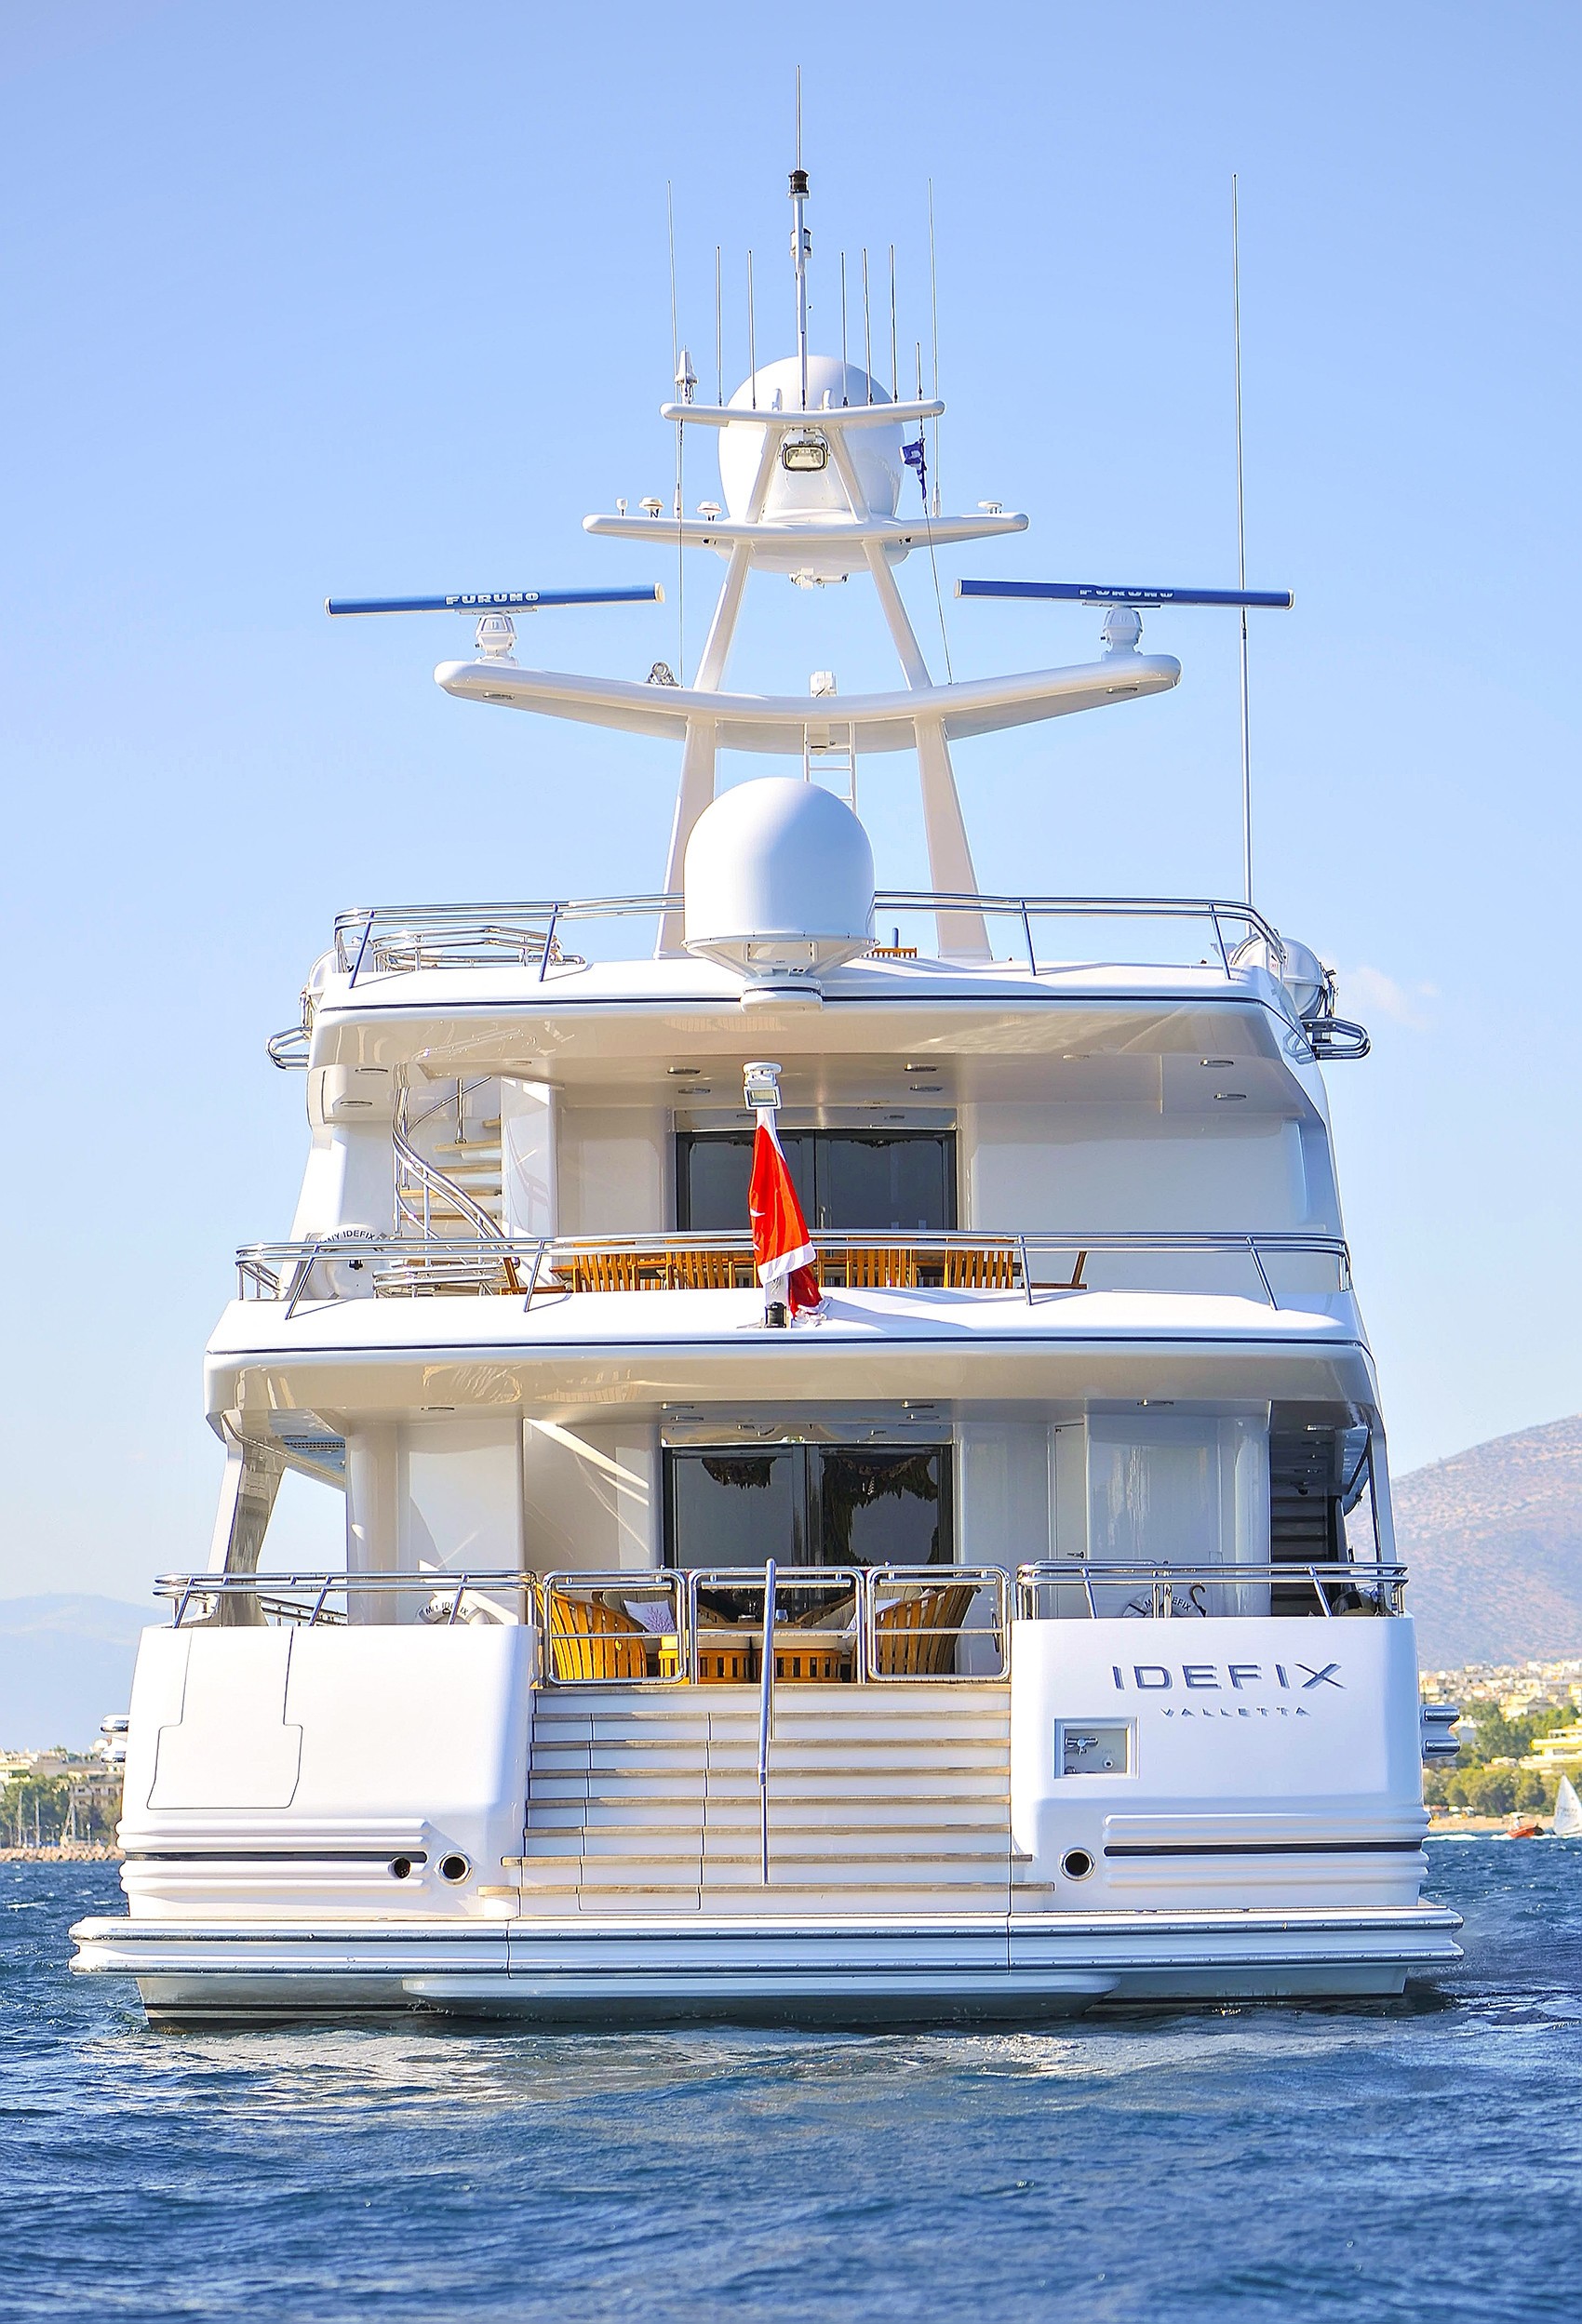 idefix 2 yacht owner